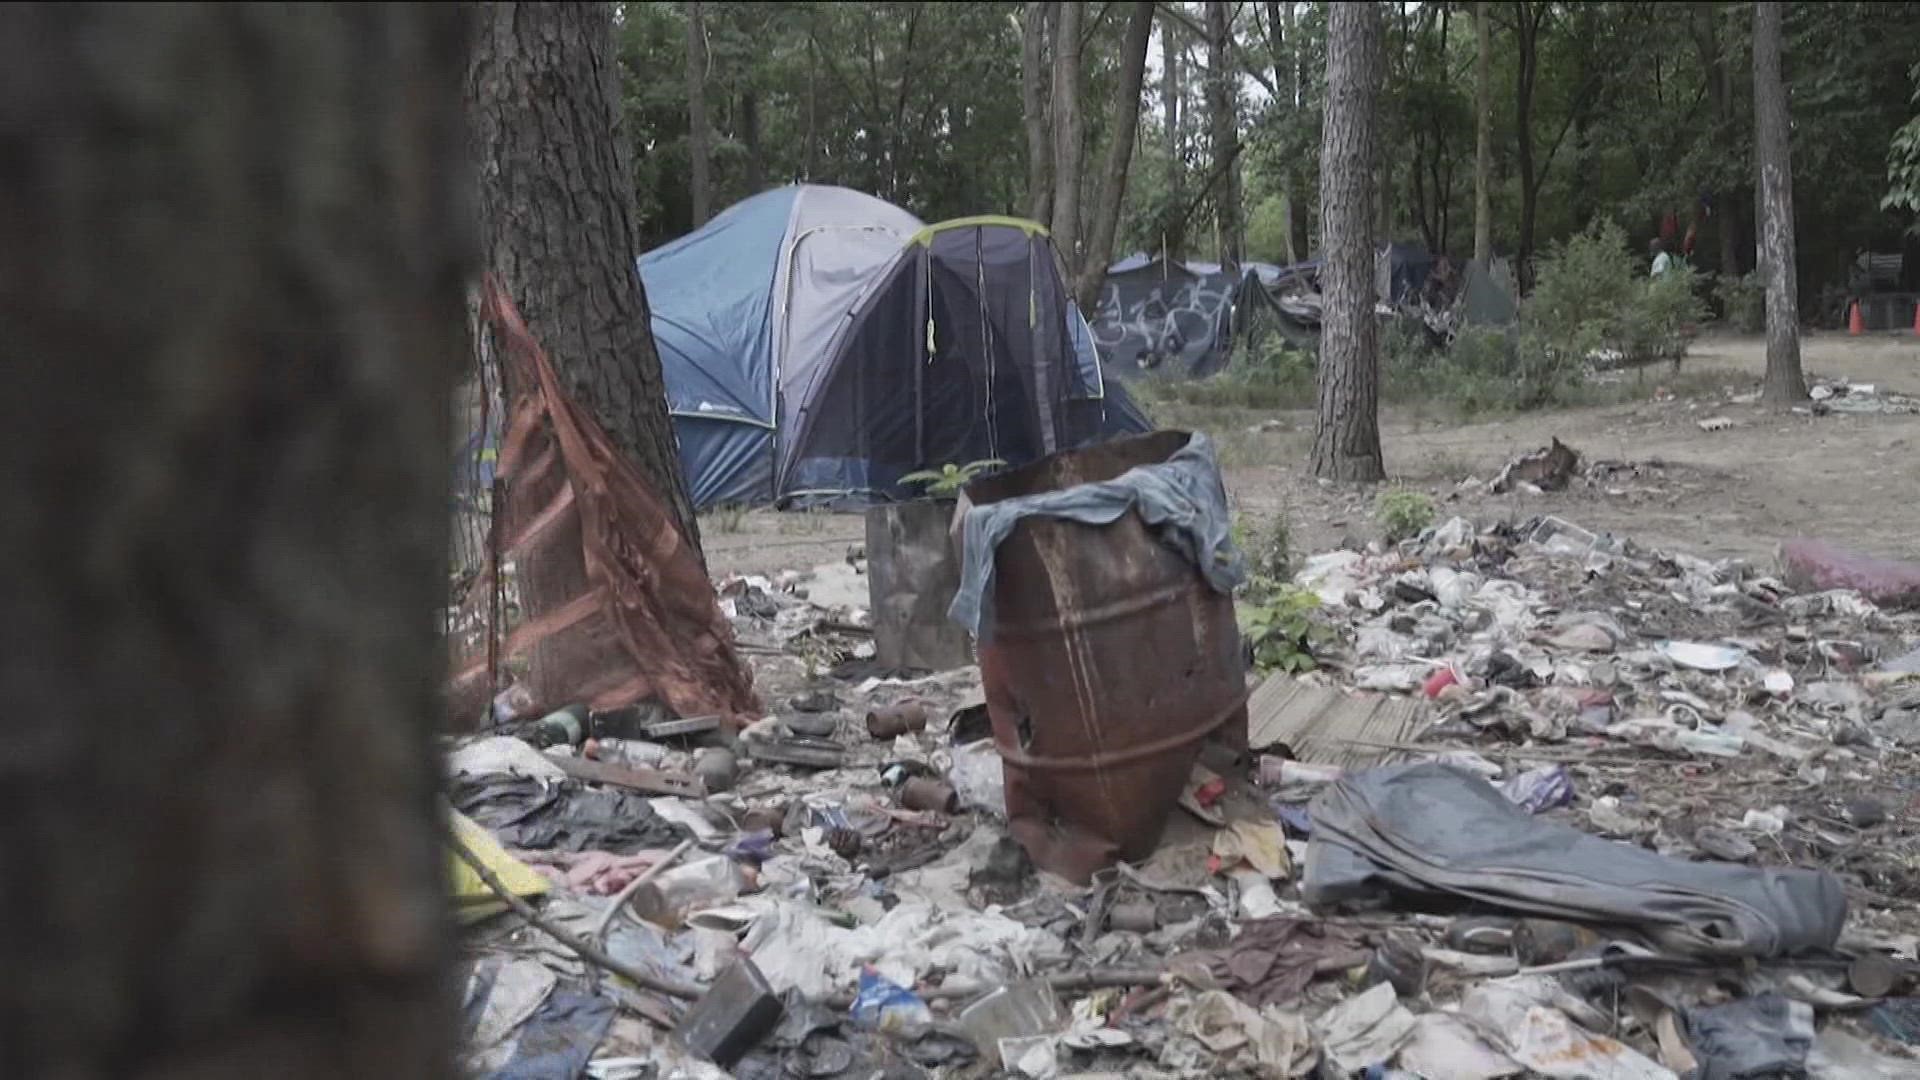 As many as 100 people had been living at the encampment near the GA 400 but there have been some safety concerns with a big fire breaking out two weeks ago.